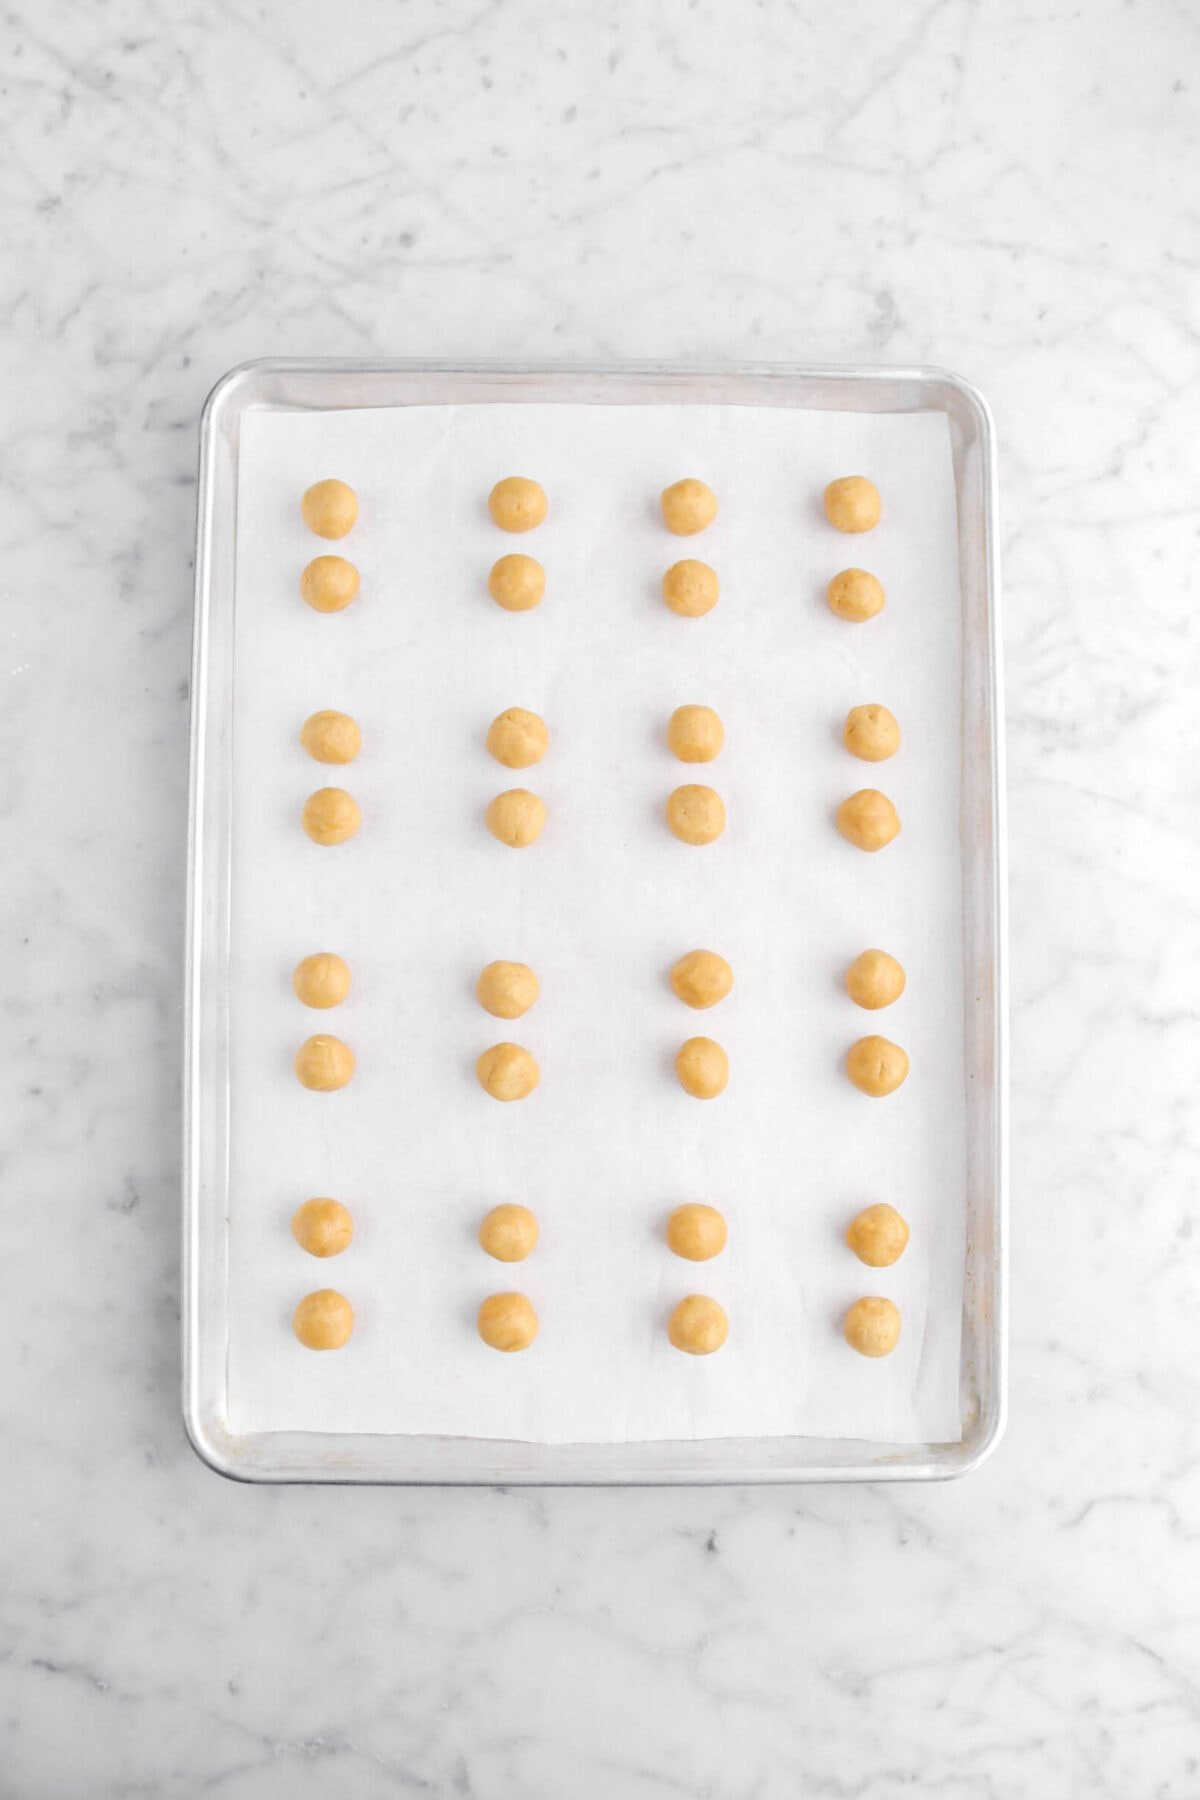 32 small balls of peanut butter cookie dough on lined sheet pan.